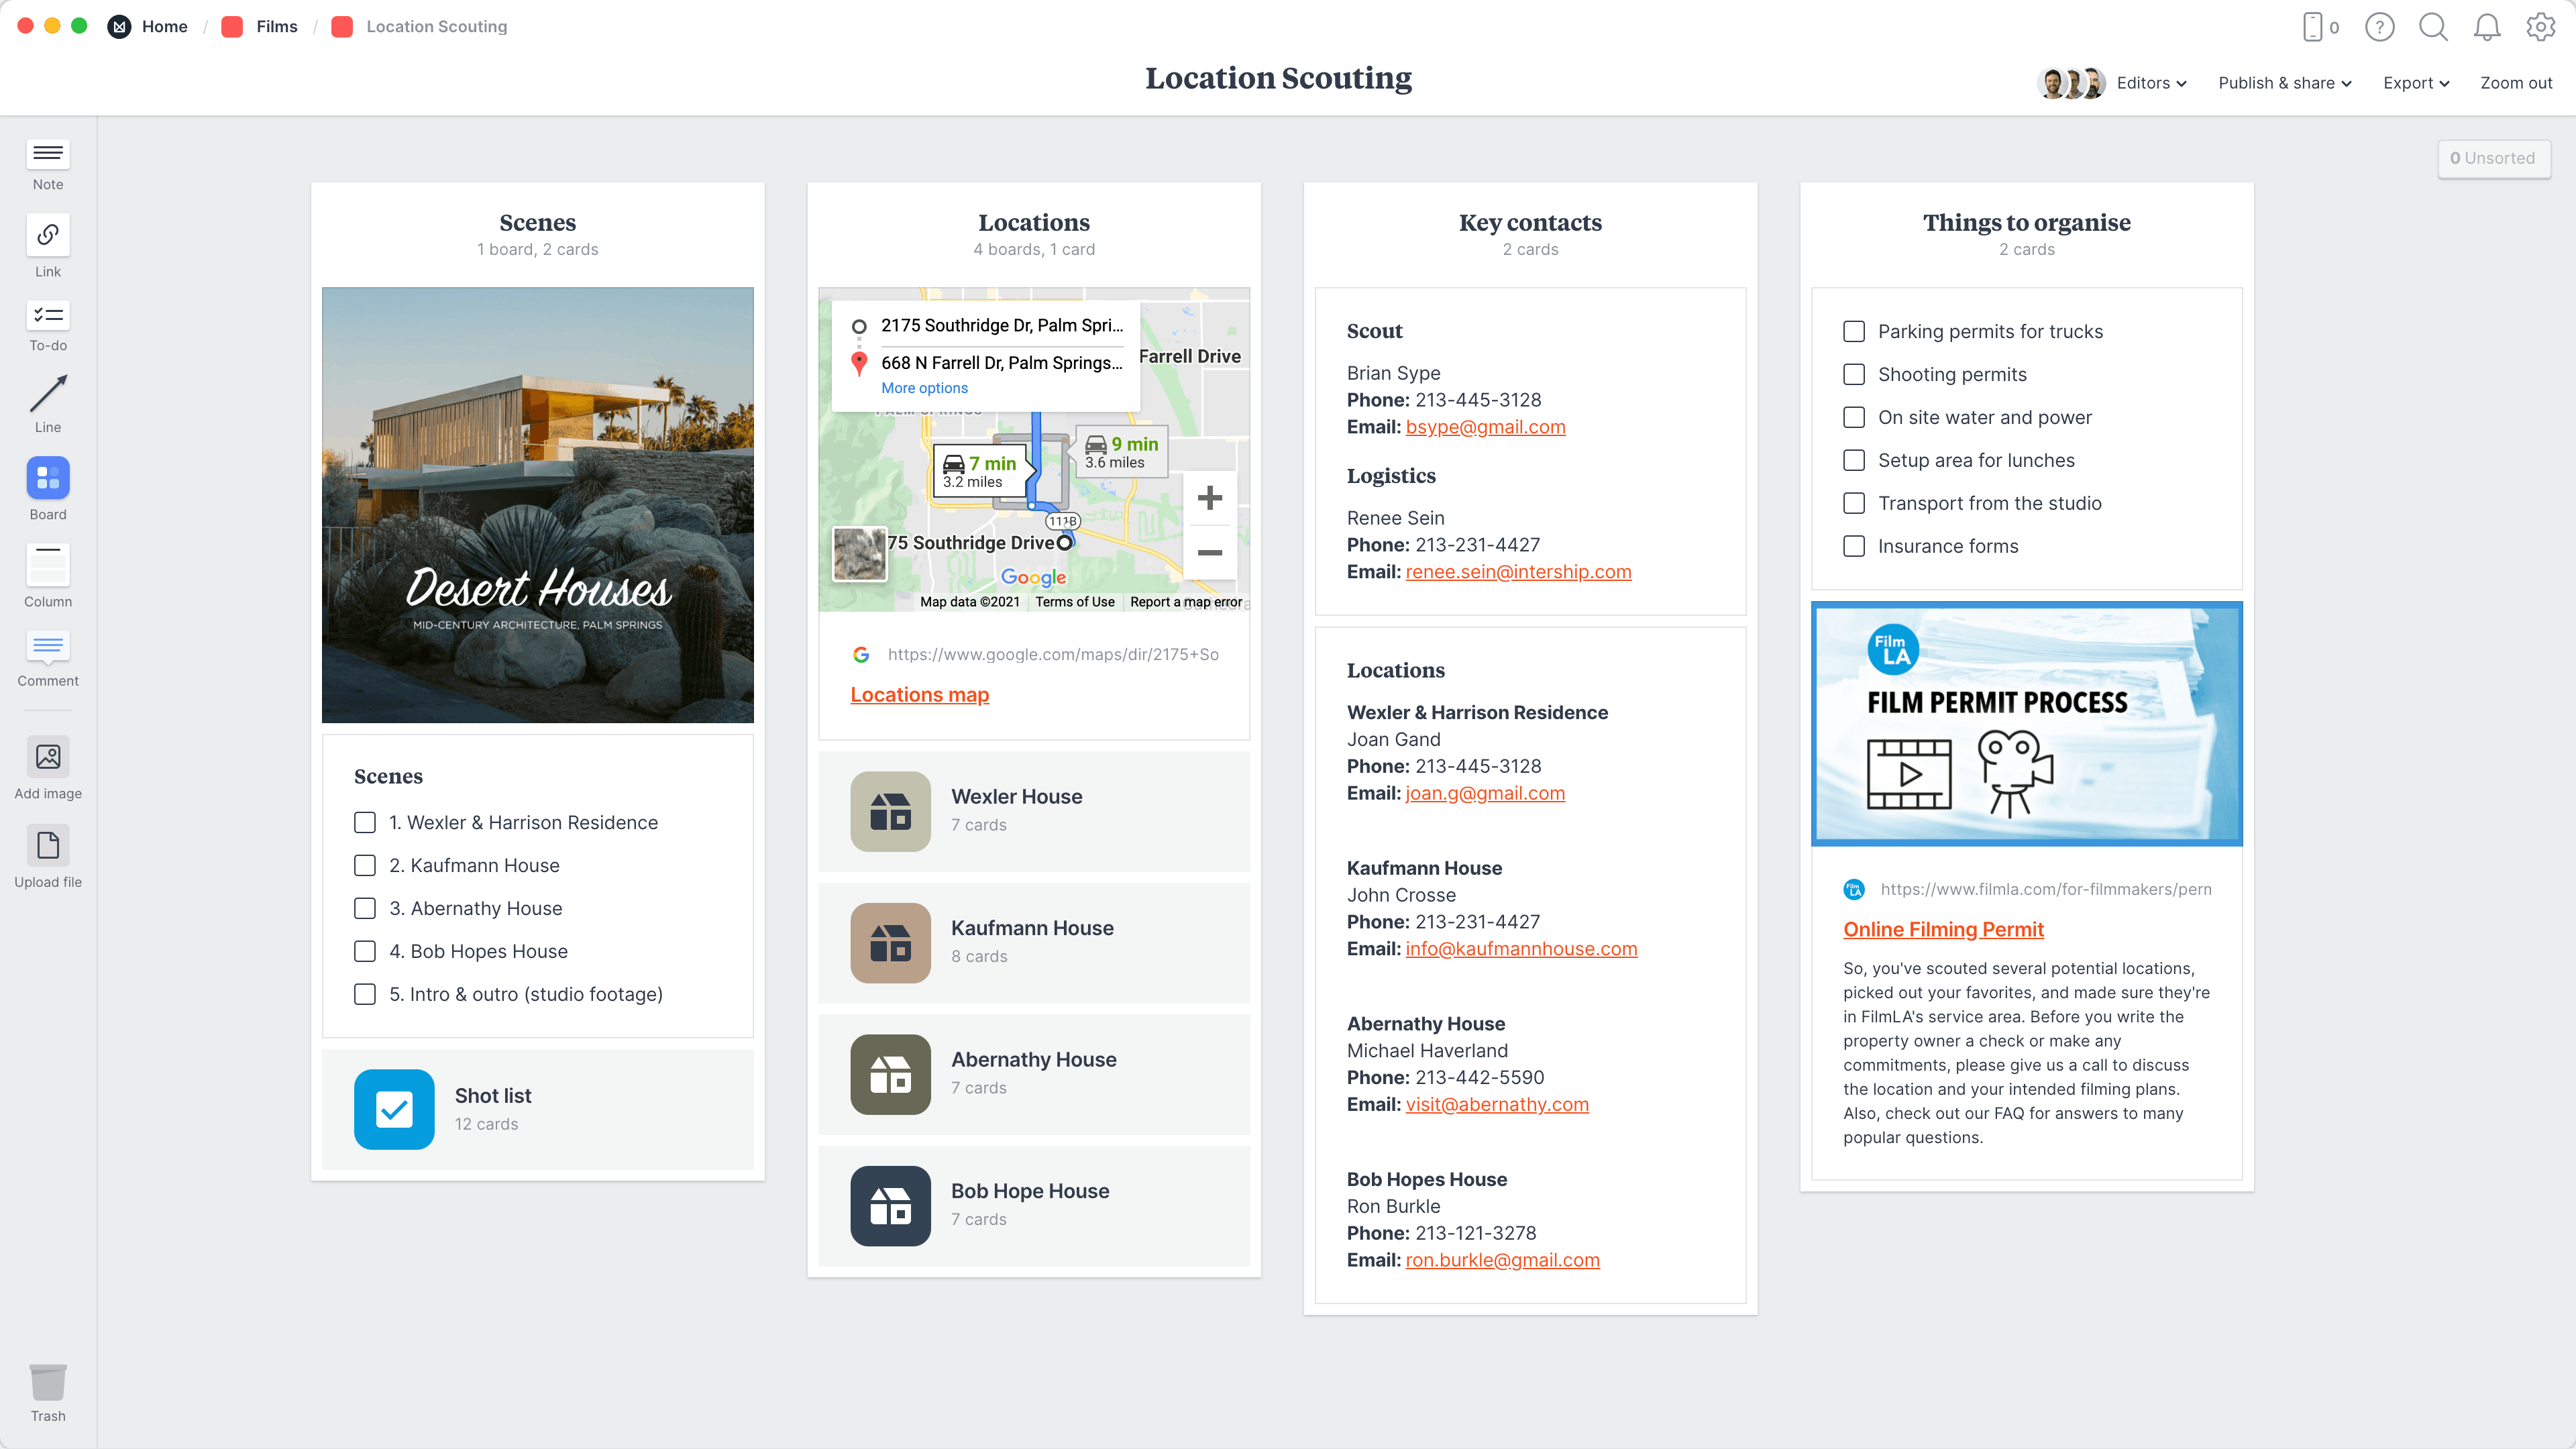 Film Location Scouting Template, within the Milanote app